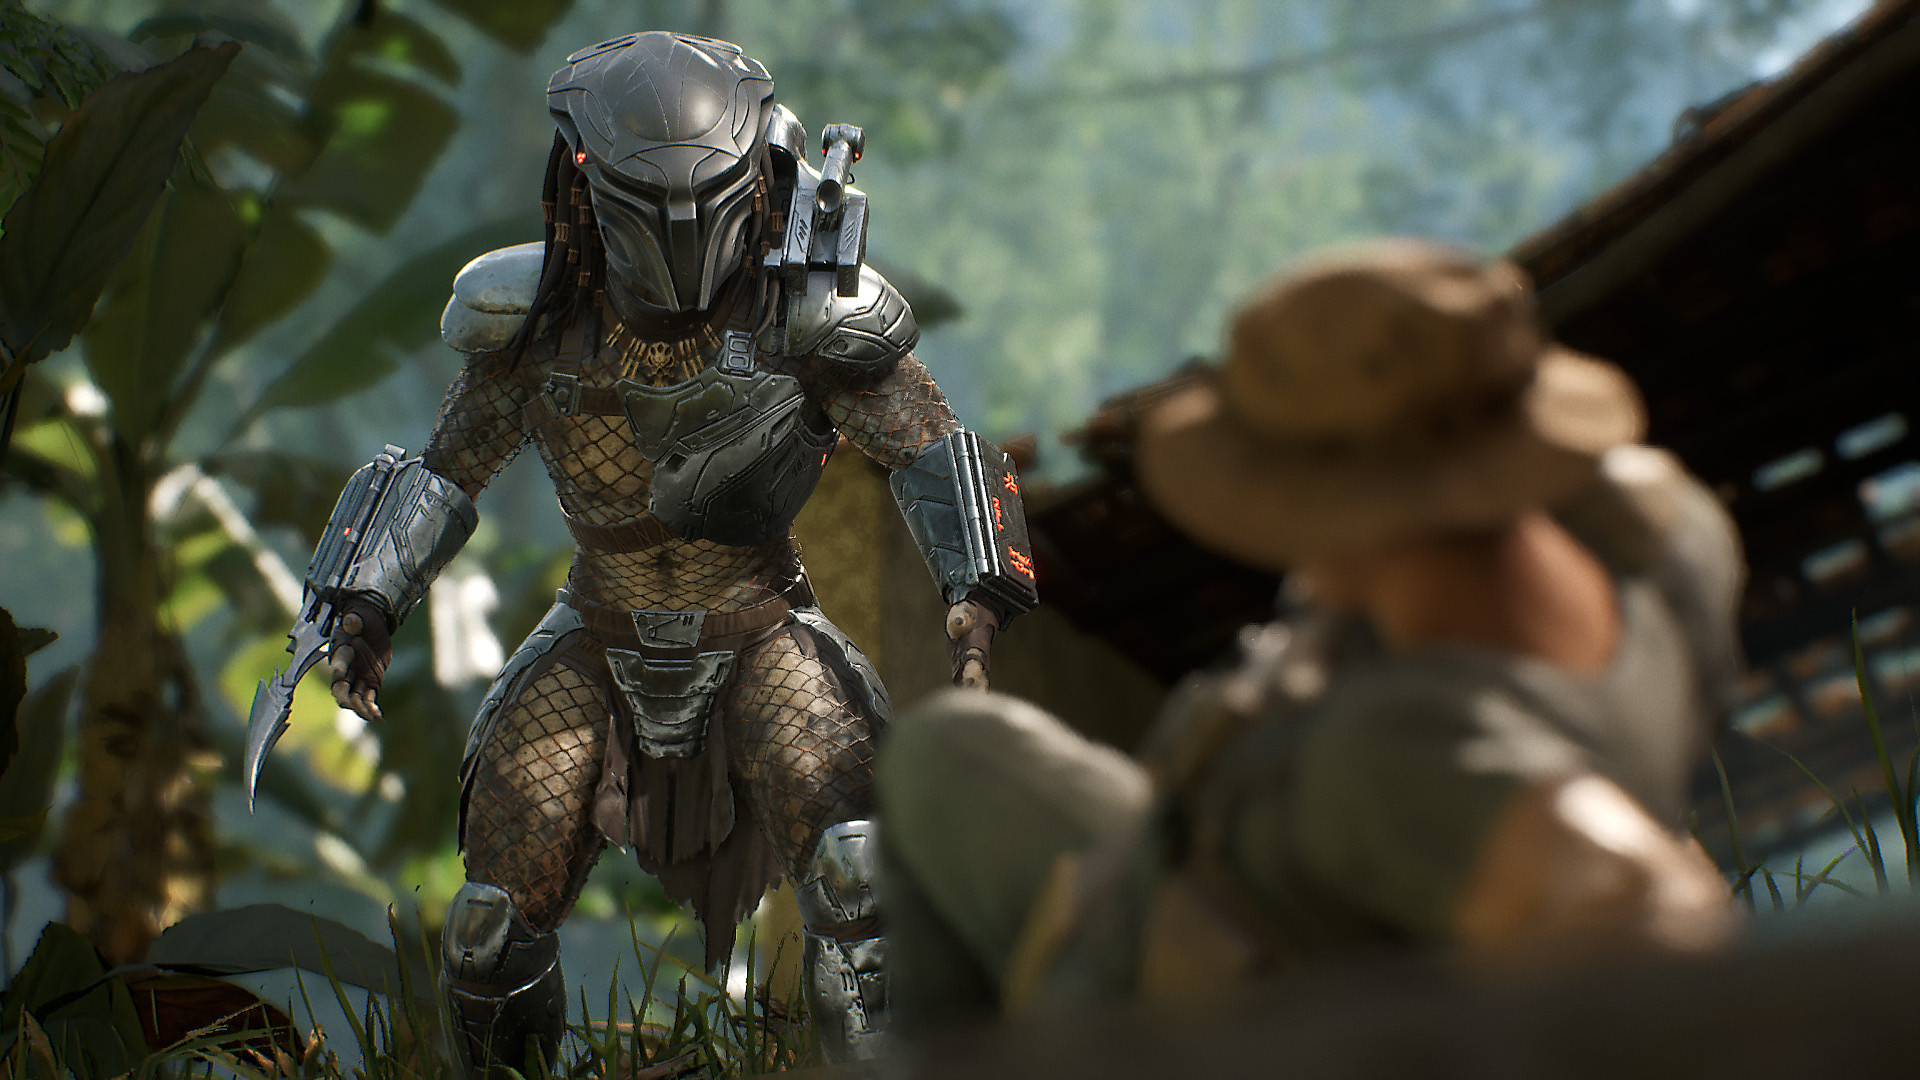 Hands on With Predator: Hunting Grounds at EuroGamer Expo 2019